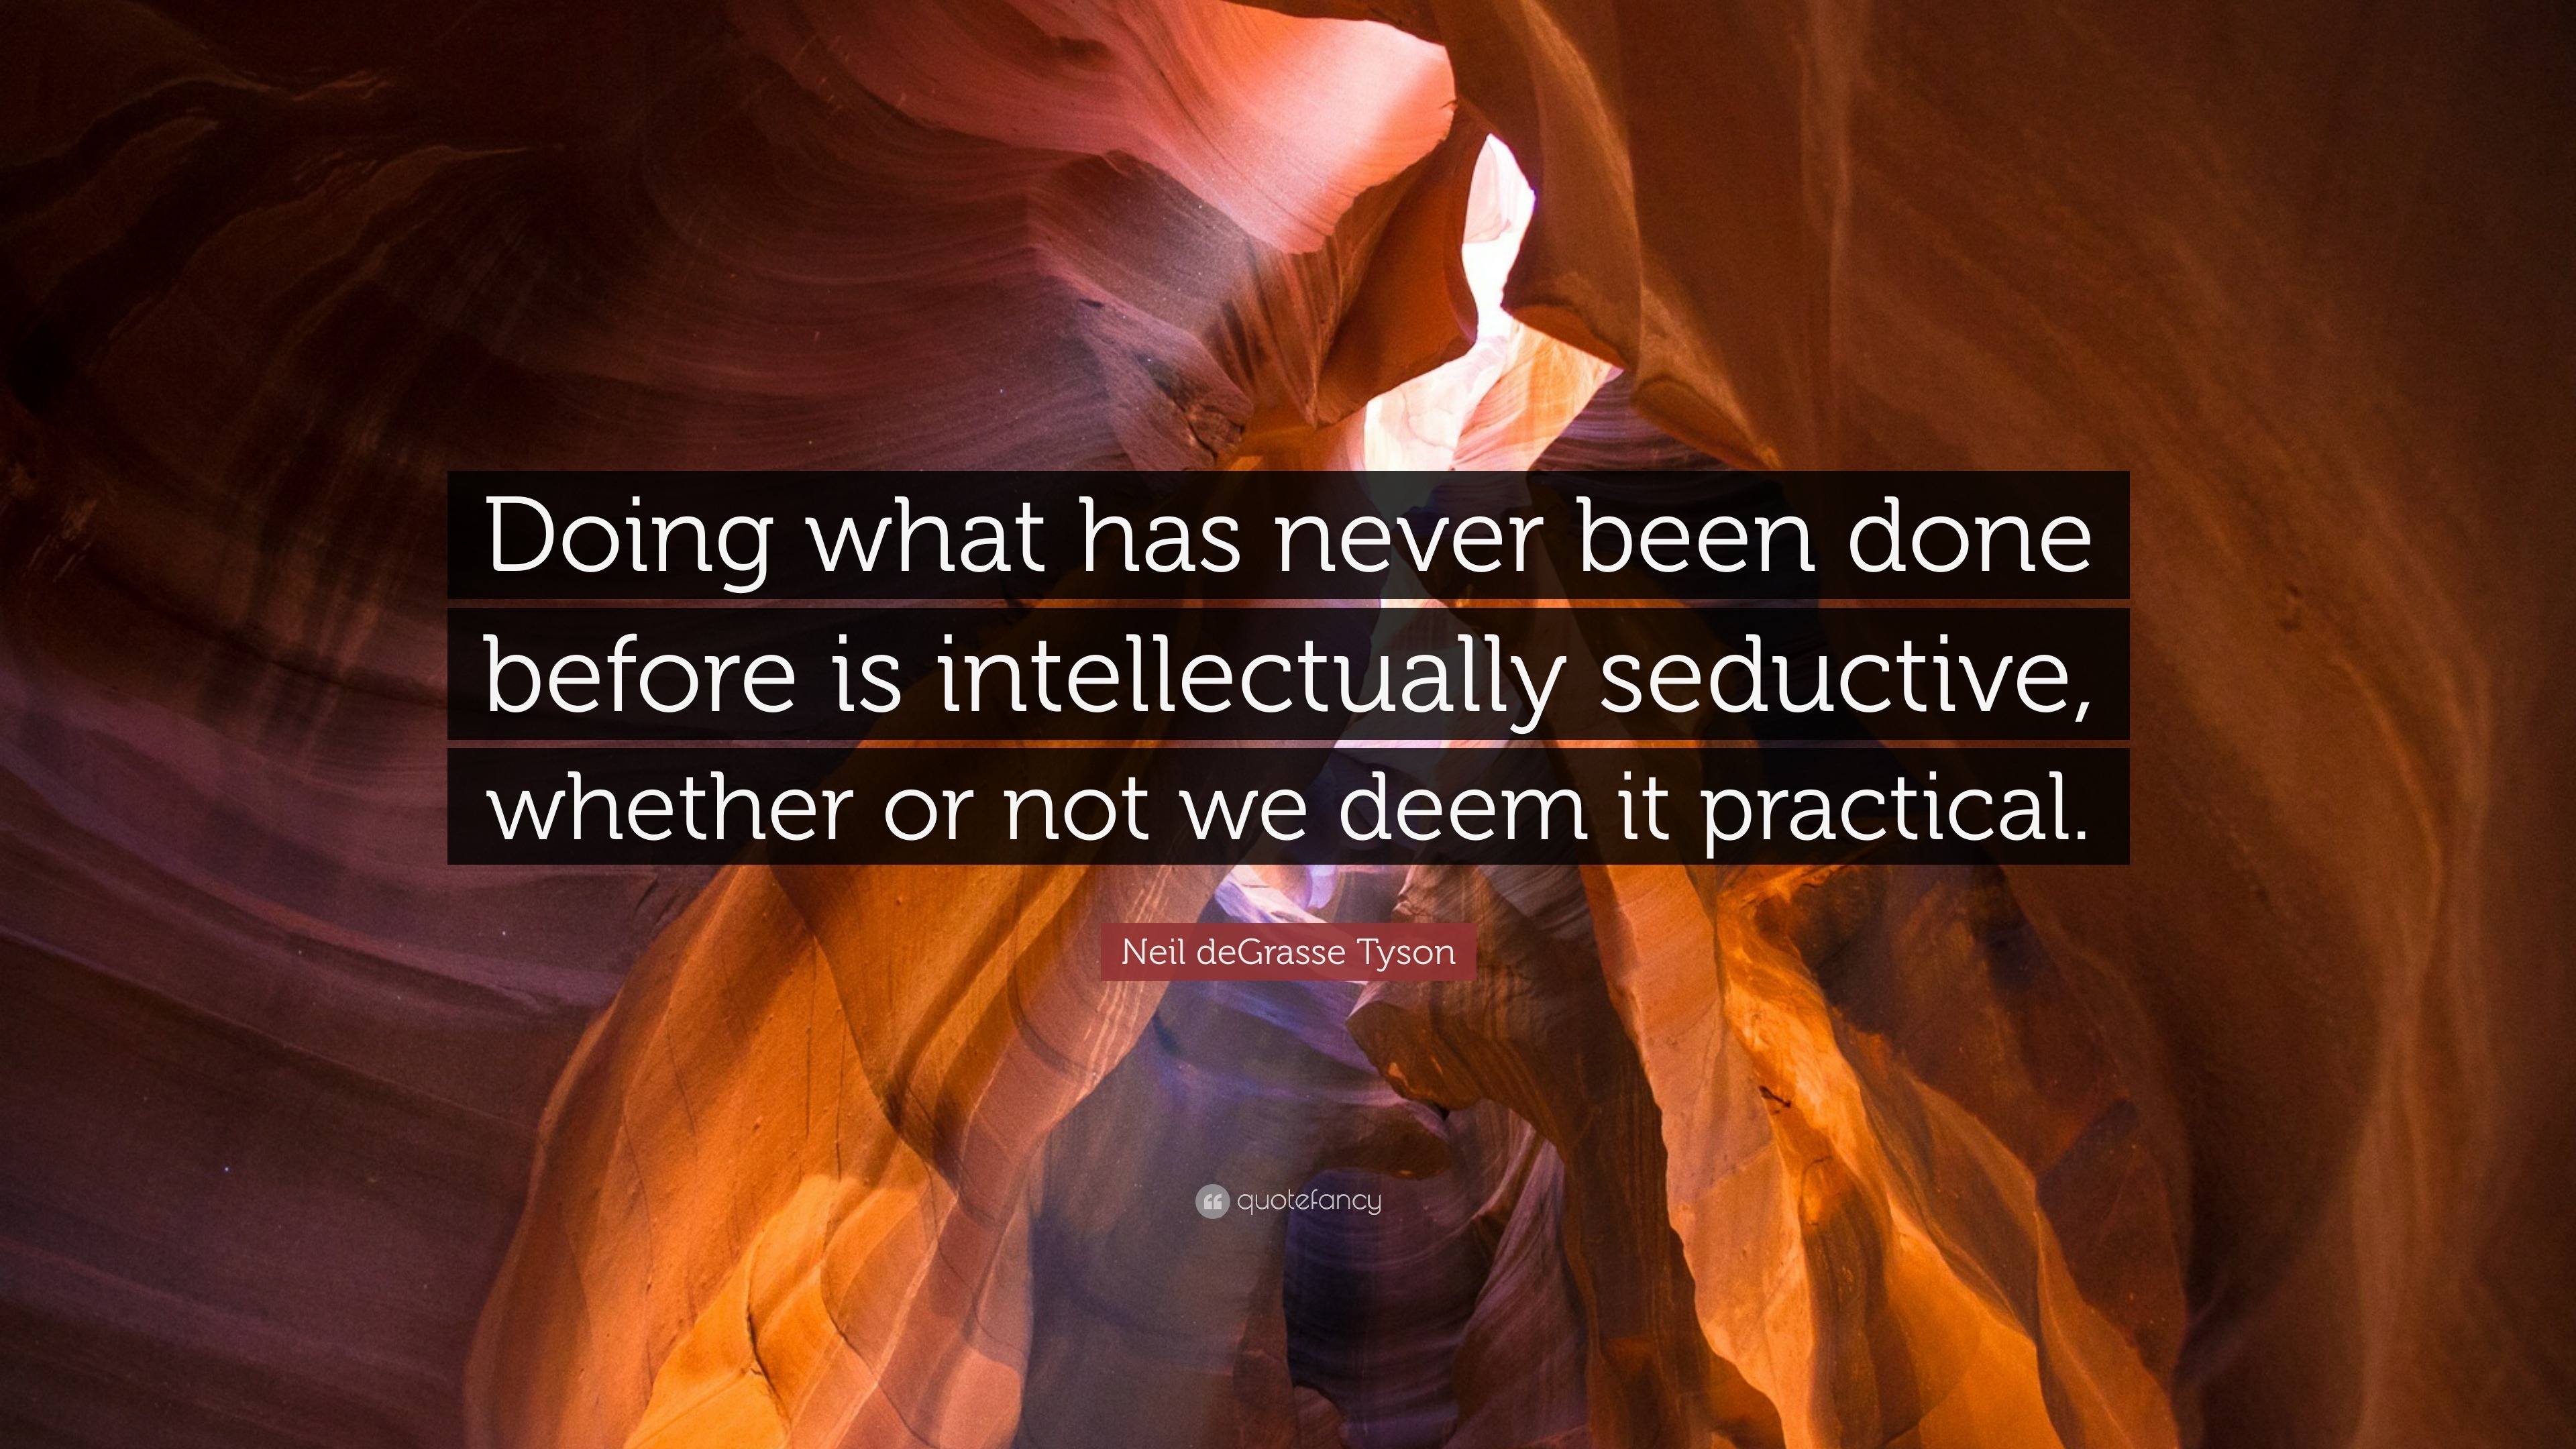 Neil deGrasse Tyson Quote: "Doing what has never been done before is intellectually seductive ...